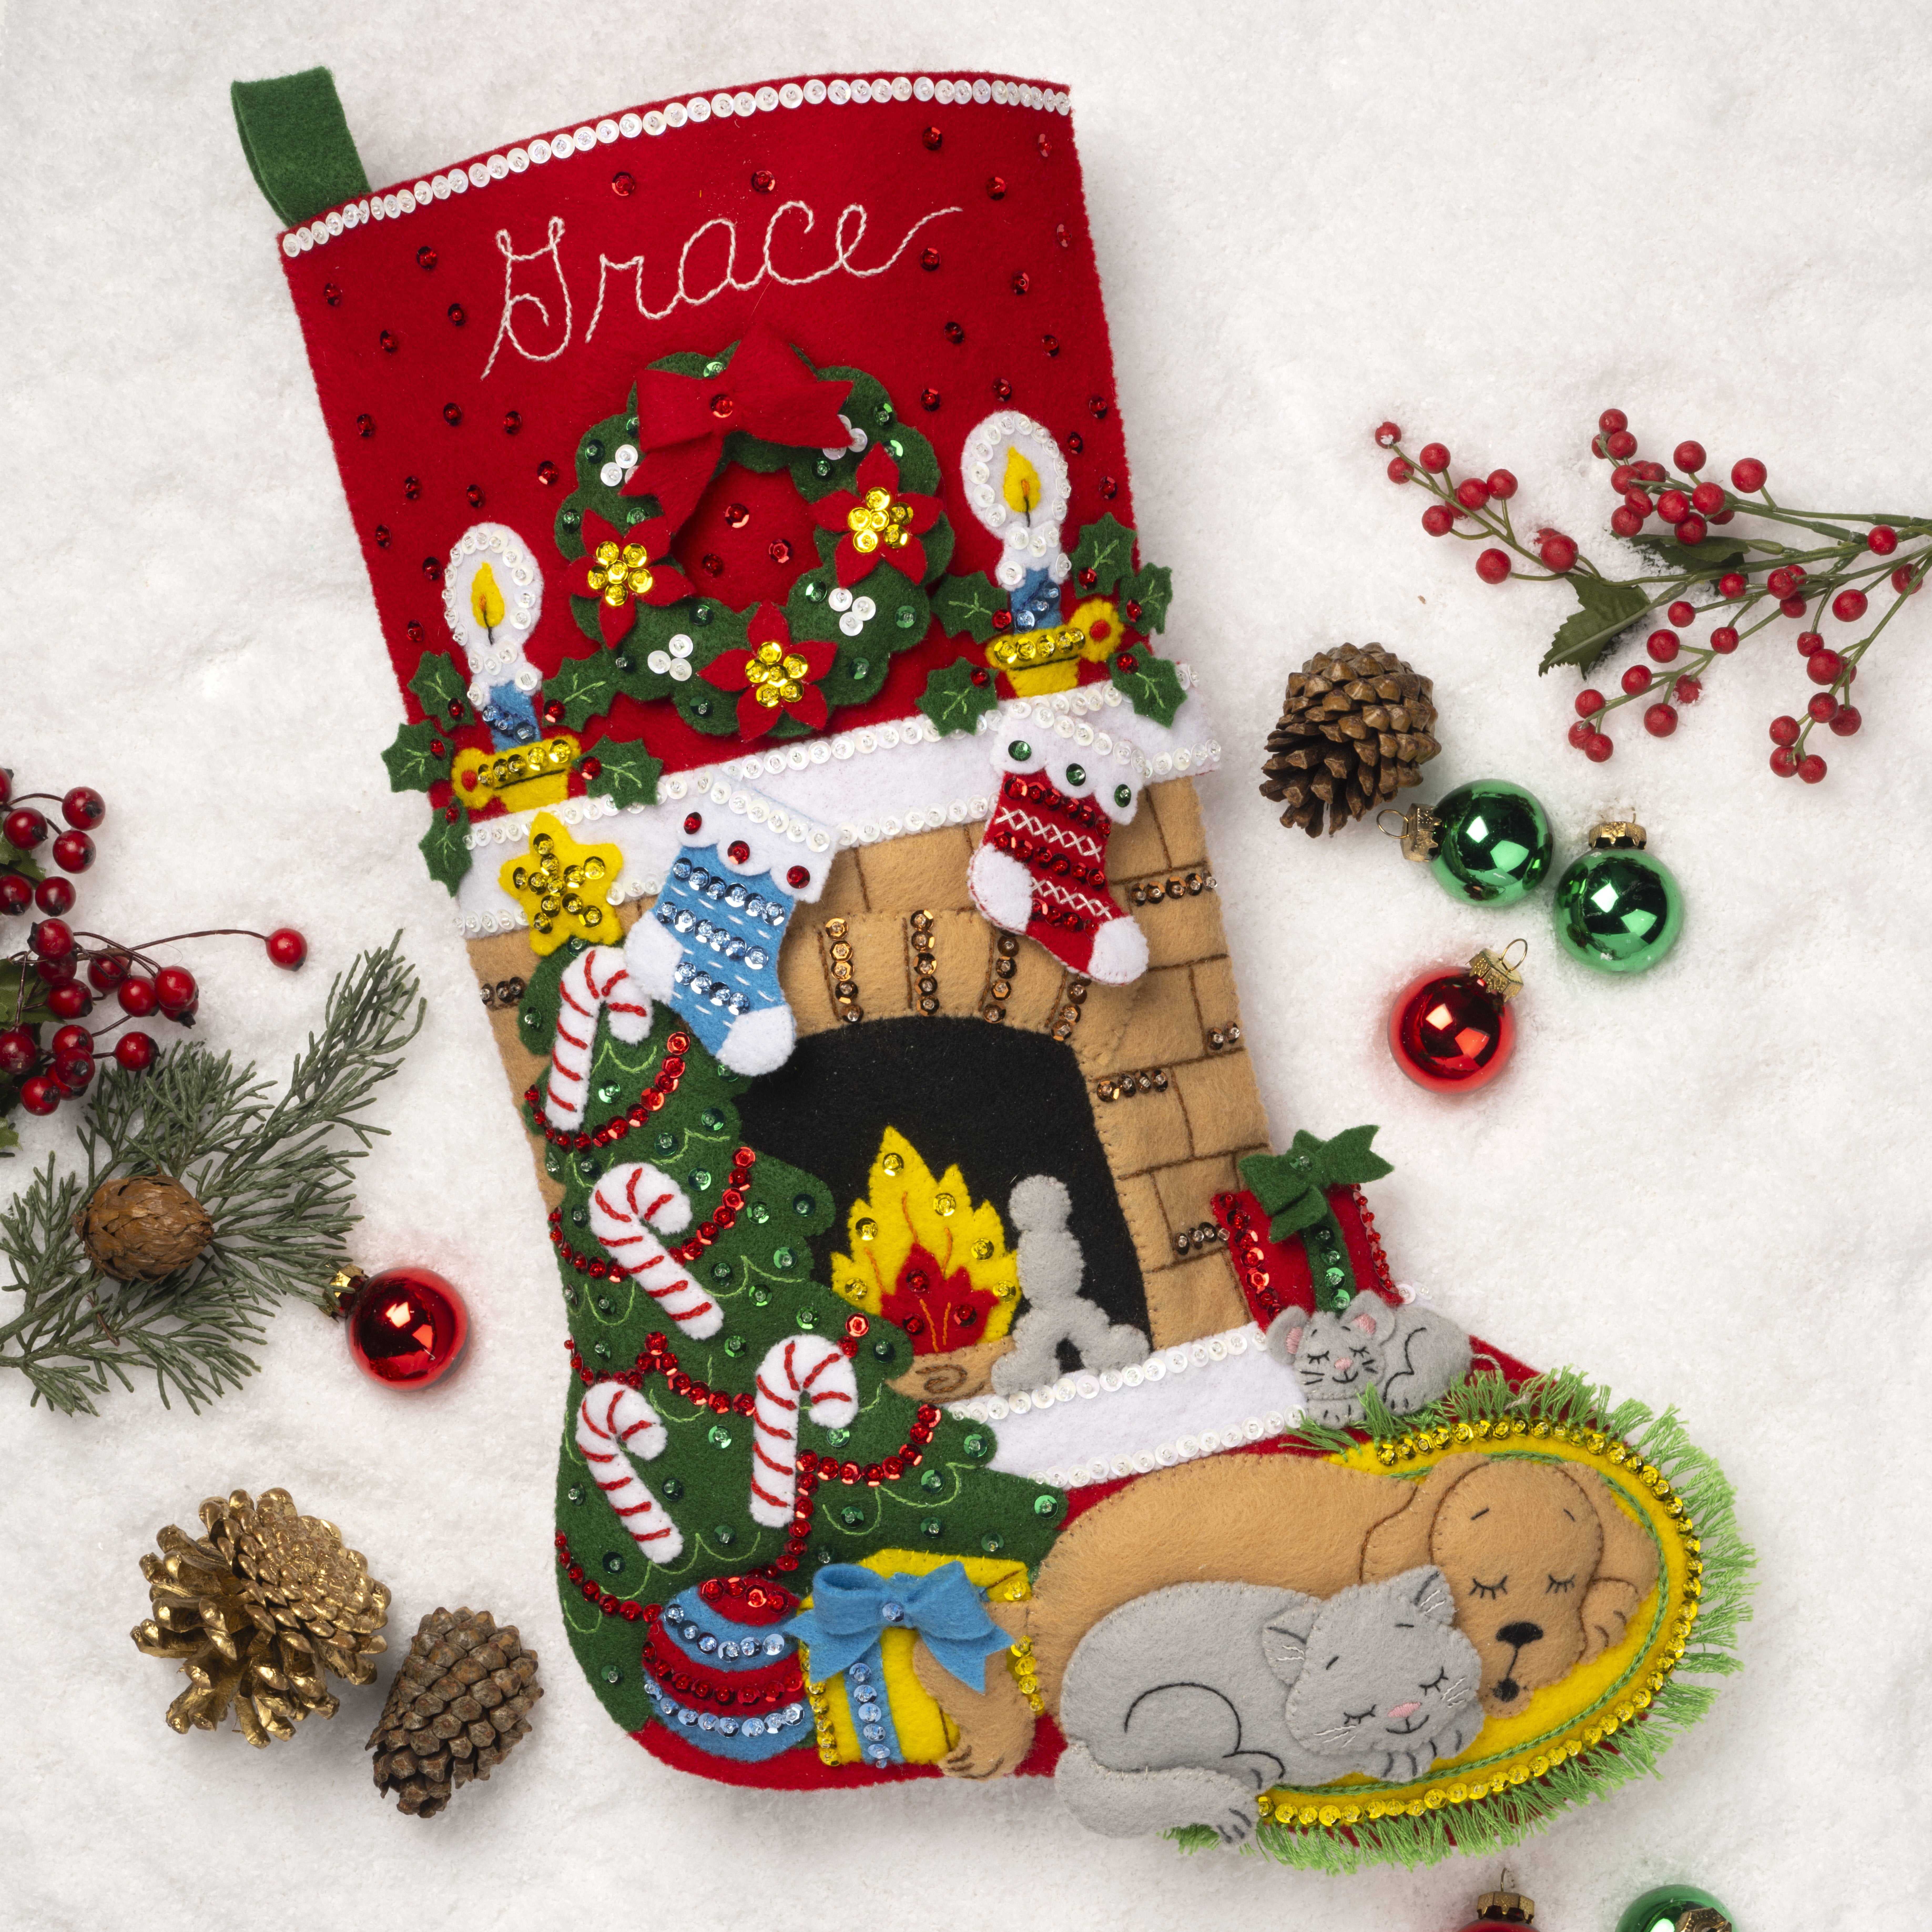  Bucilla Felt Applique 18 Stocking Making Kit, in The Garden,  Perfect for DIY Arts and Crafts, 89334E